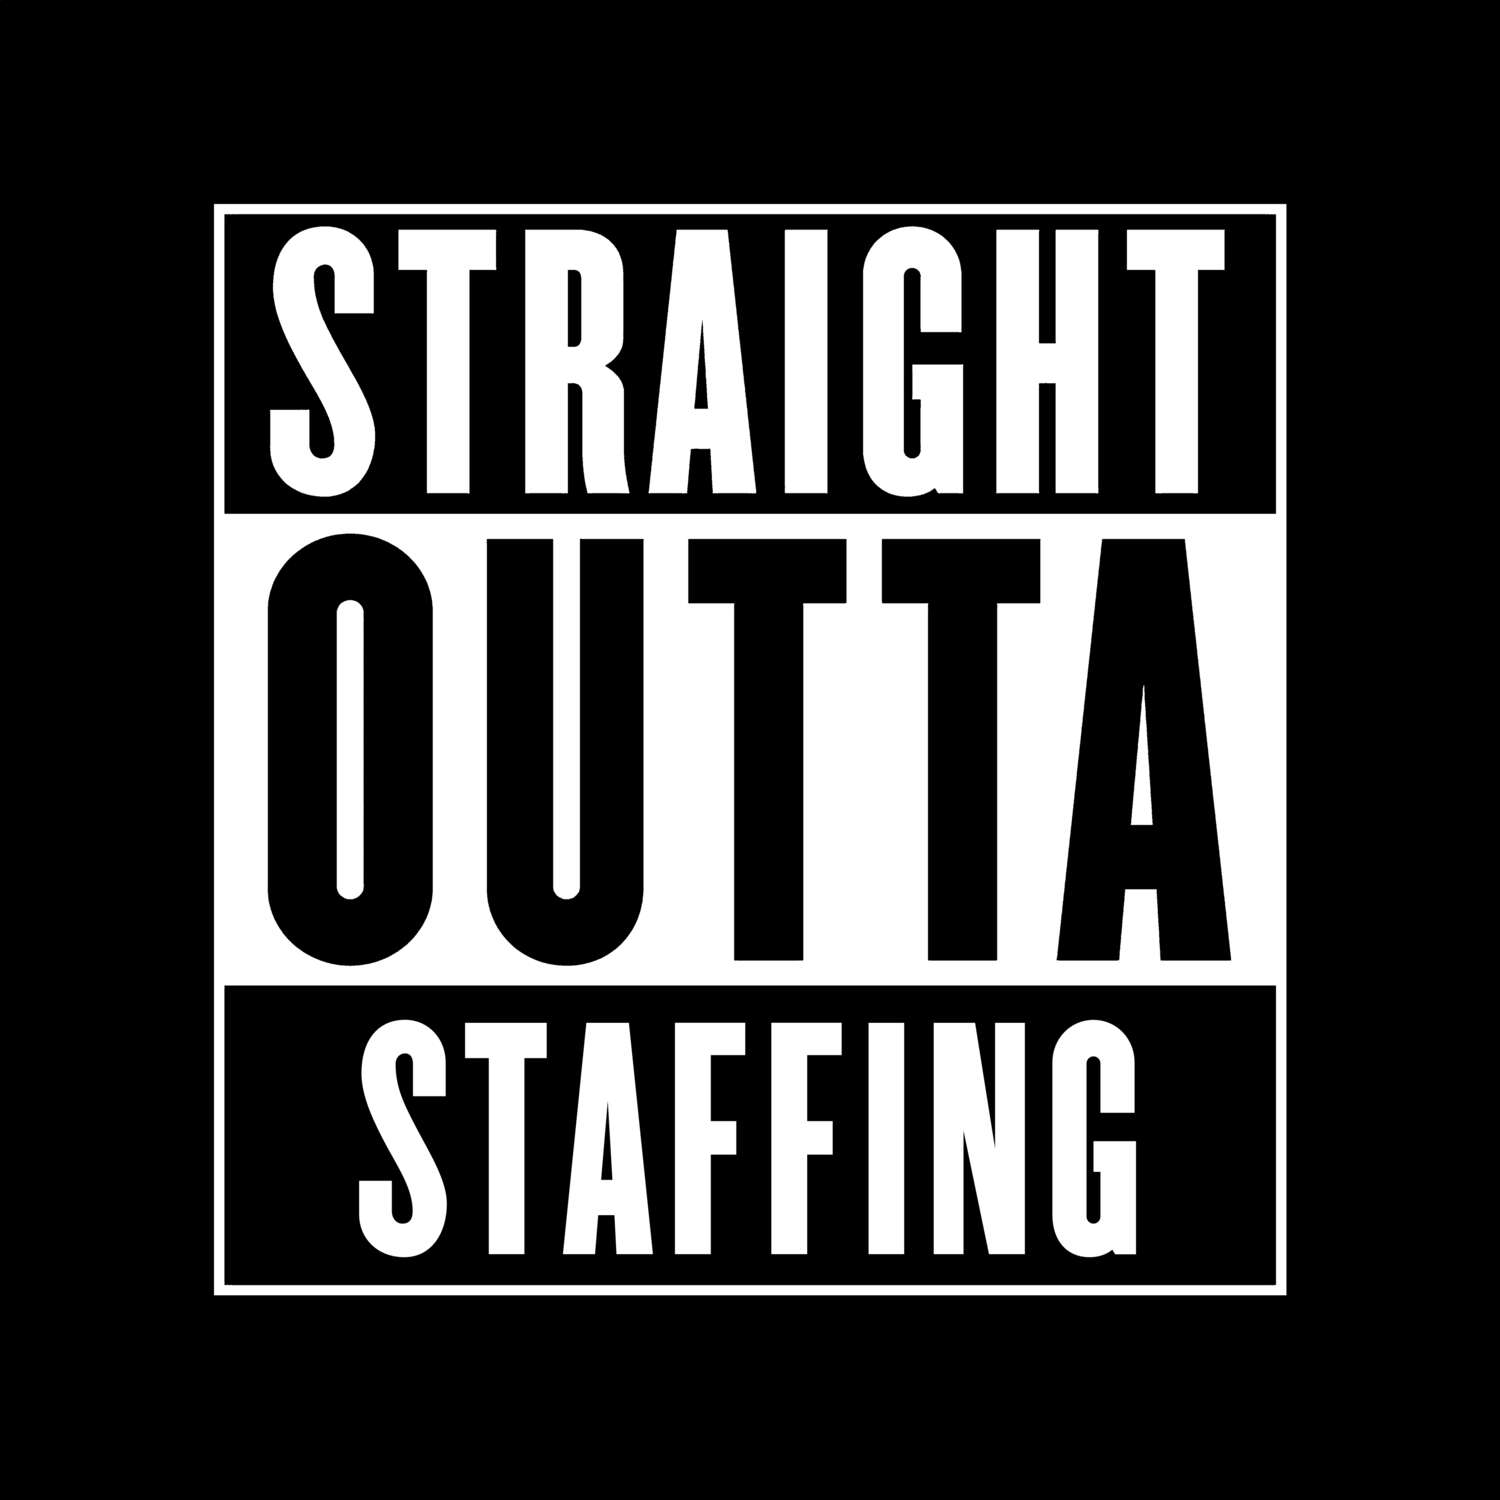 Staffing T-Shirt »Straight Outta«